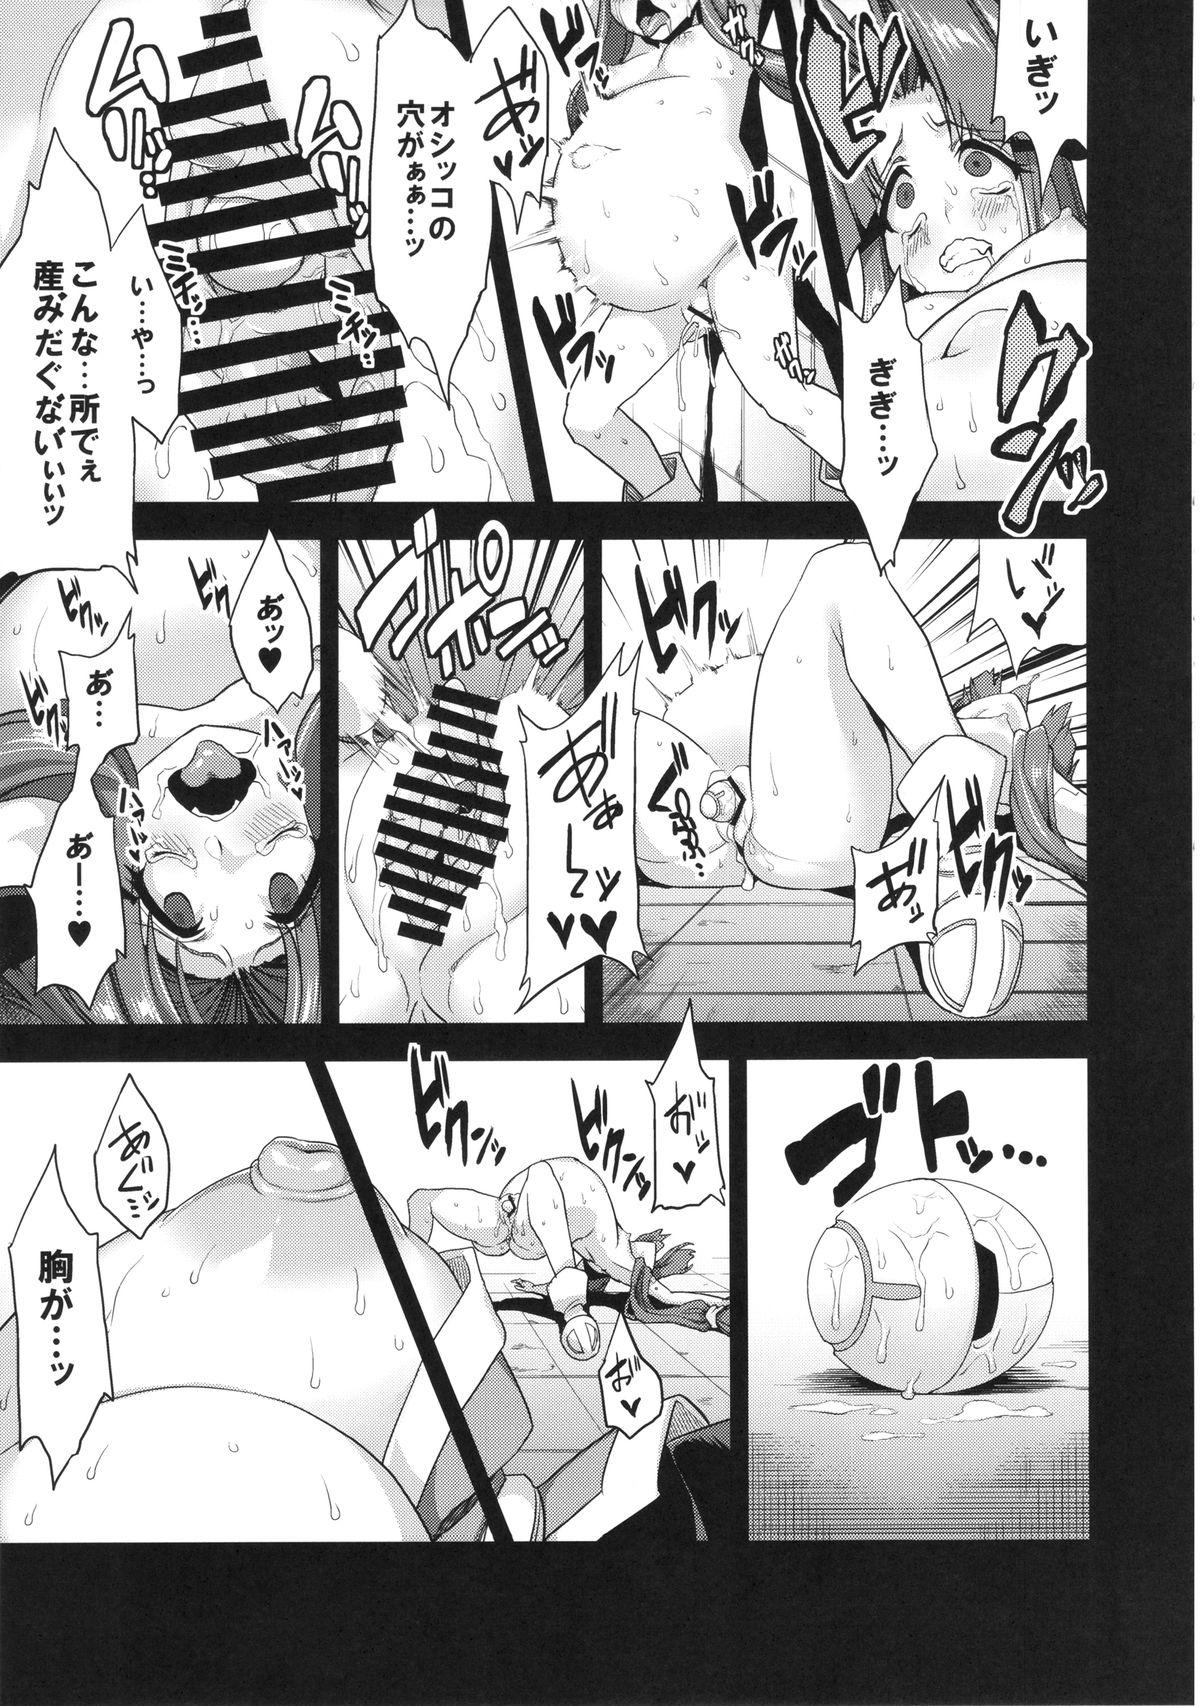 Blowjob Hentai Marionette 2 + OV - REQ - Saber marionette Old - Page 6